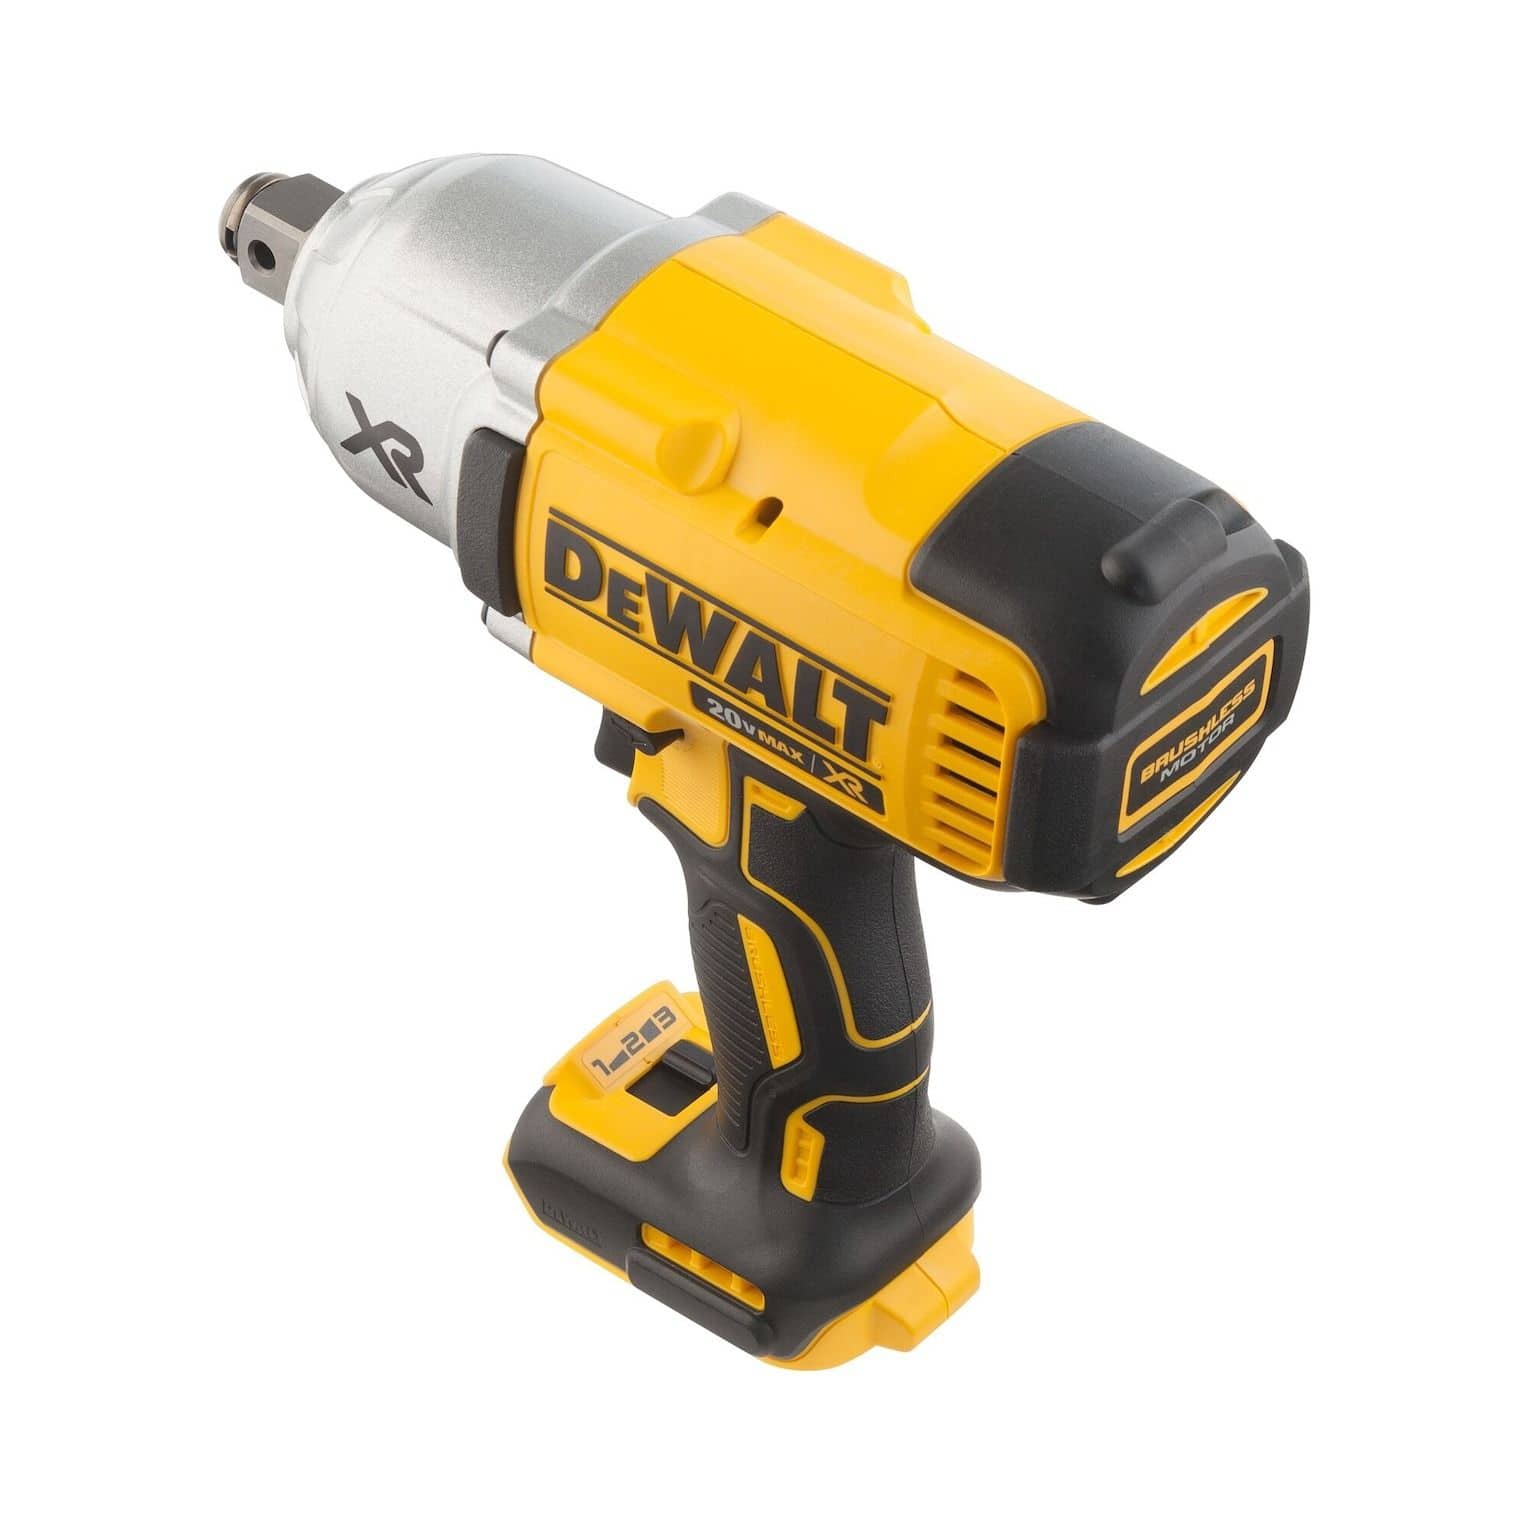 DEWALT DCF897B 20V MAX XR 3 Speed High Torque Brushless Impact Wrench with  Detent Pin, 3/4-in, Tool Only